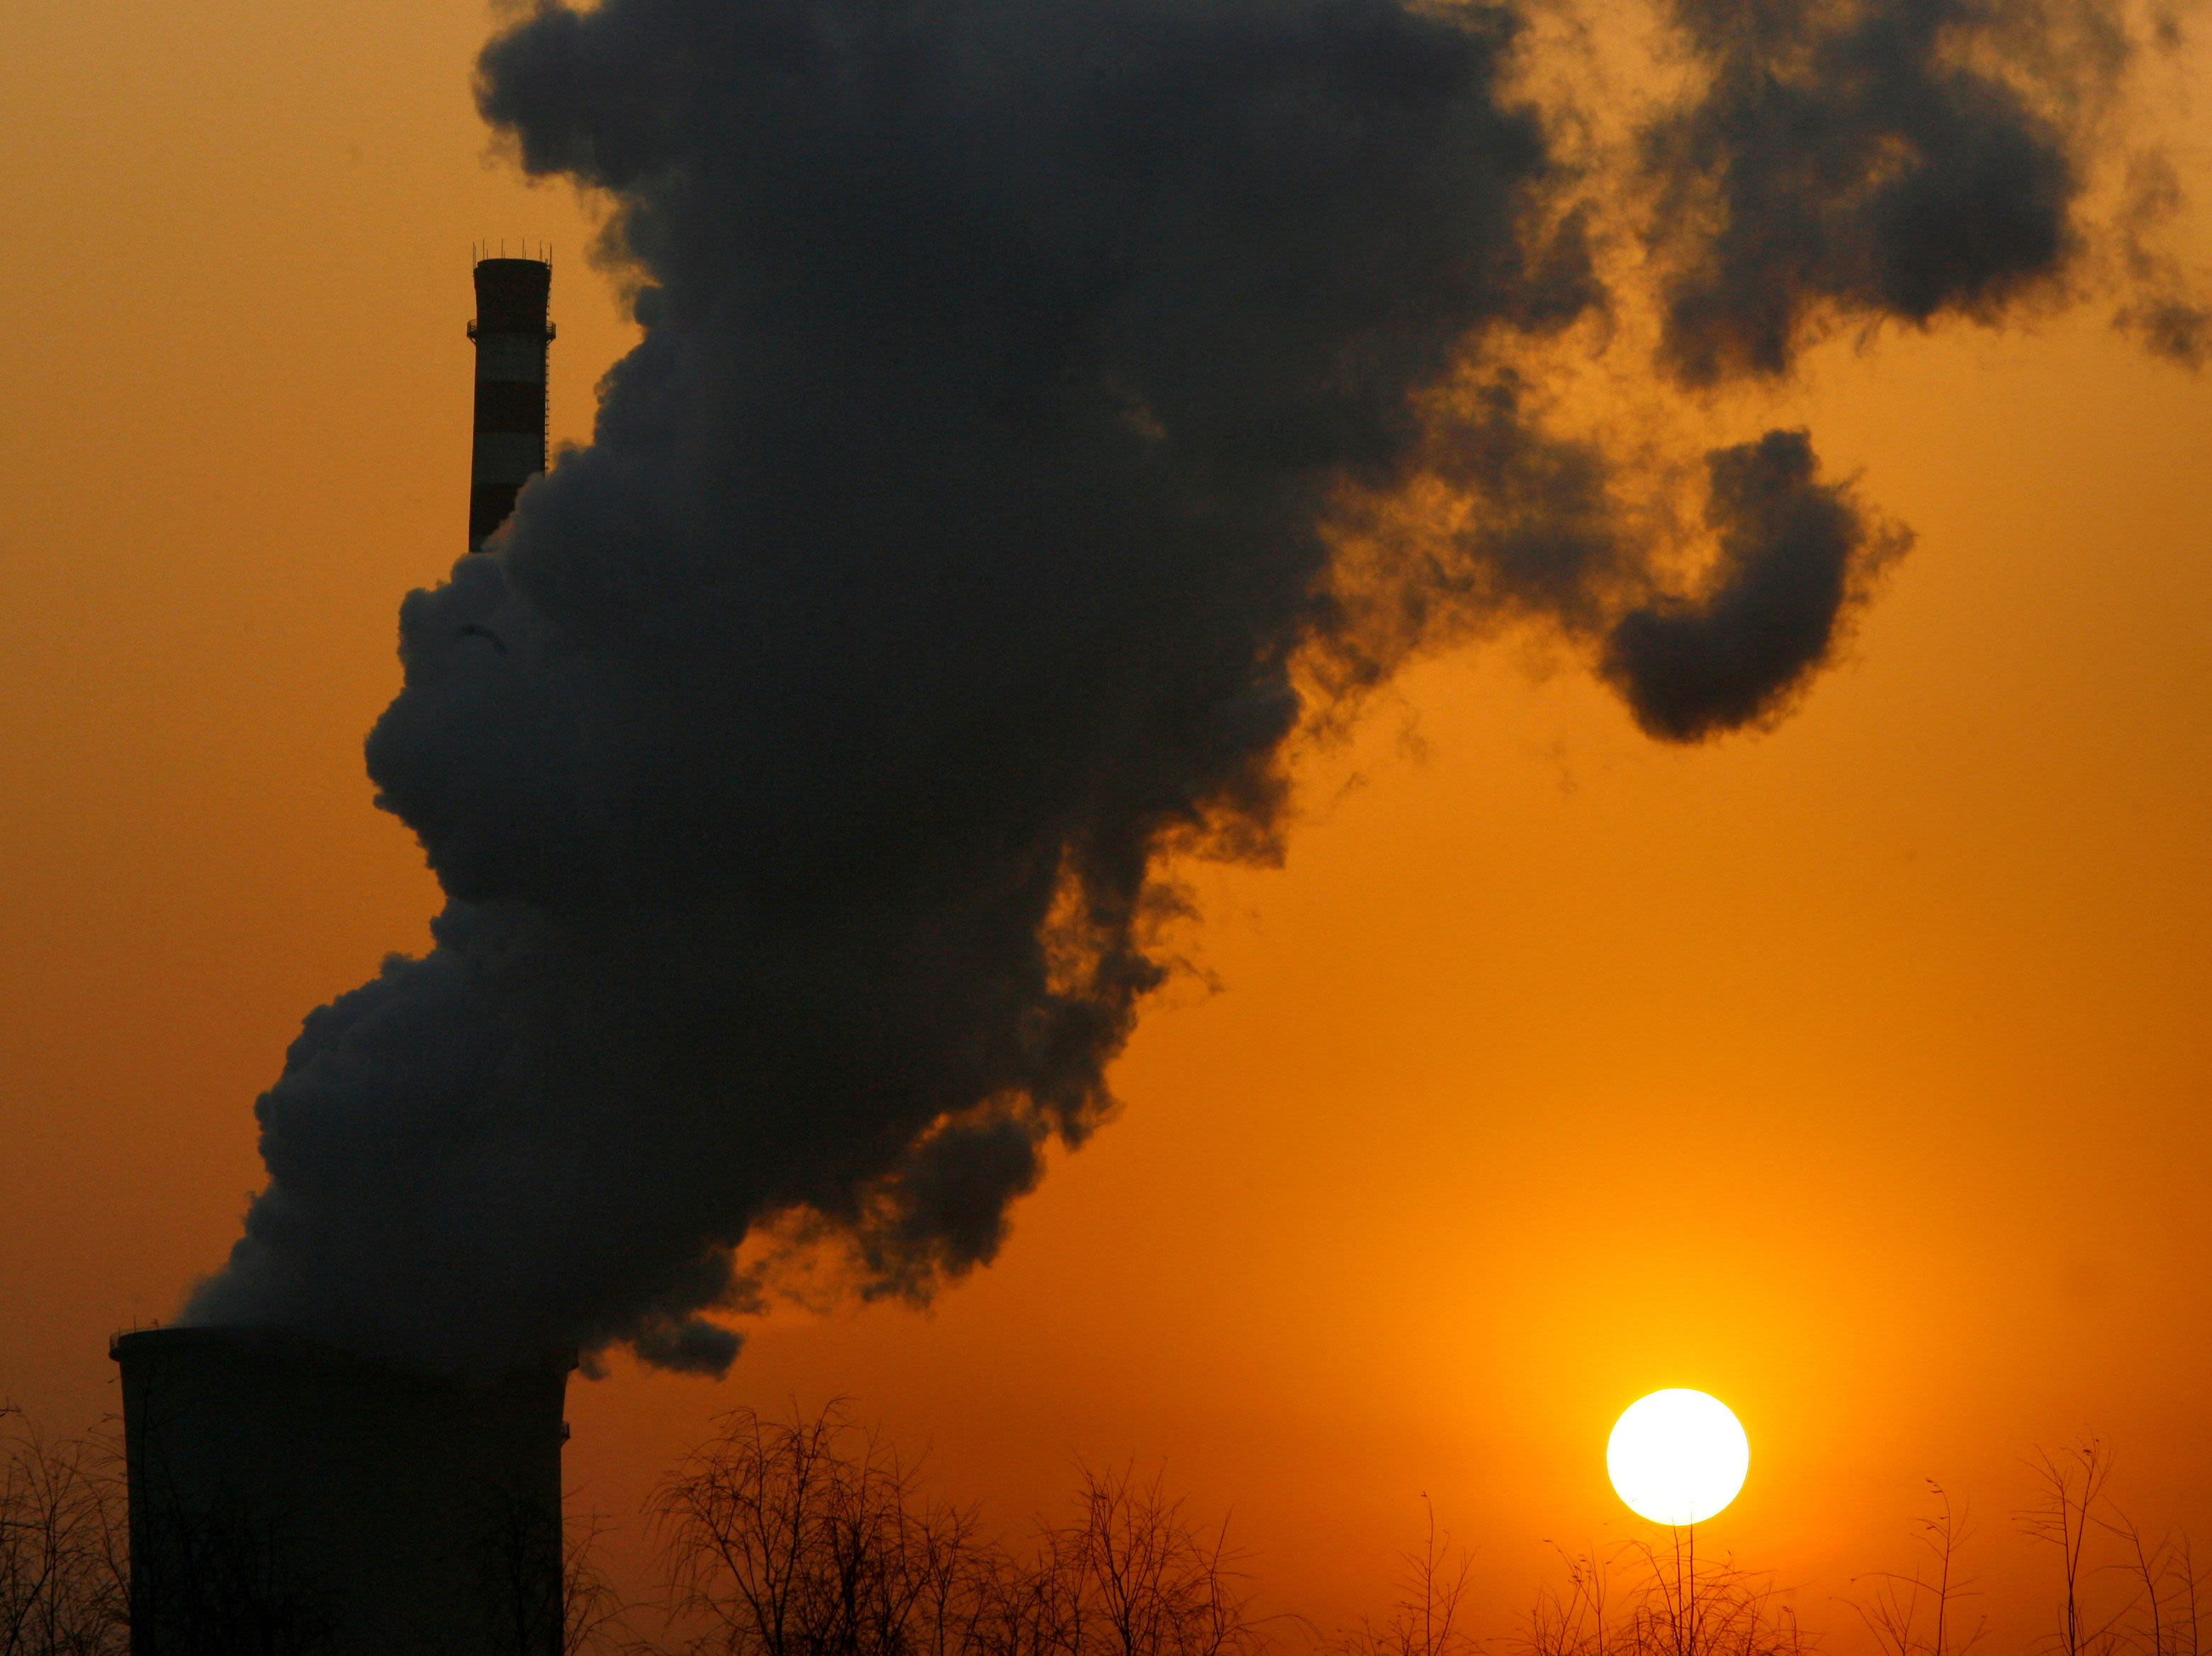 Touted as a climate solution, carbon offsets come back under scrutiny